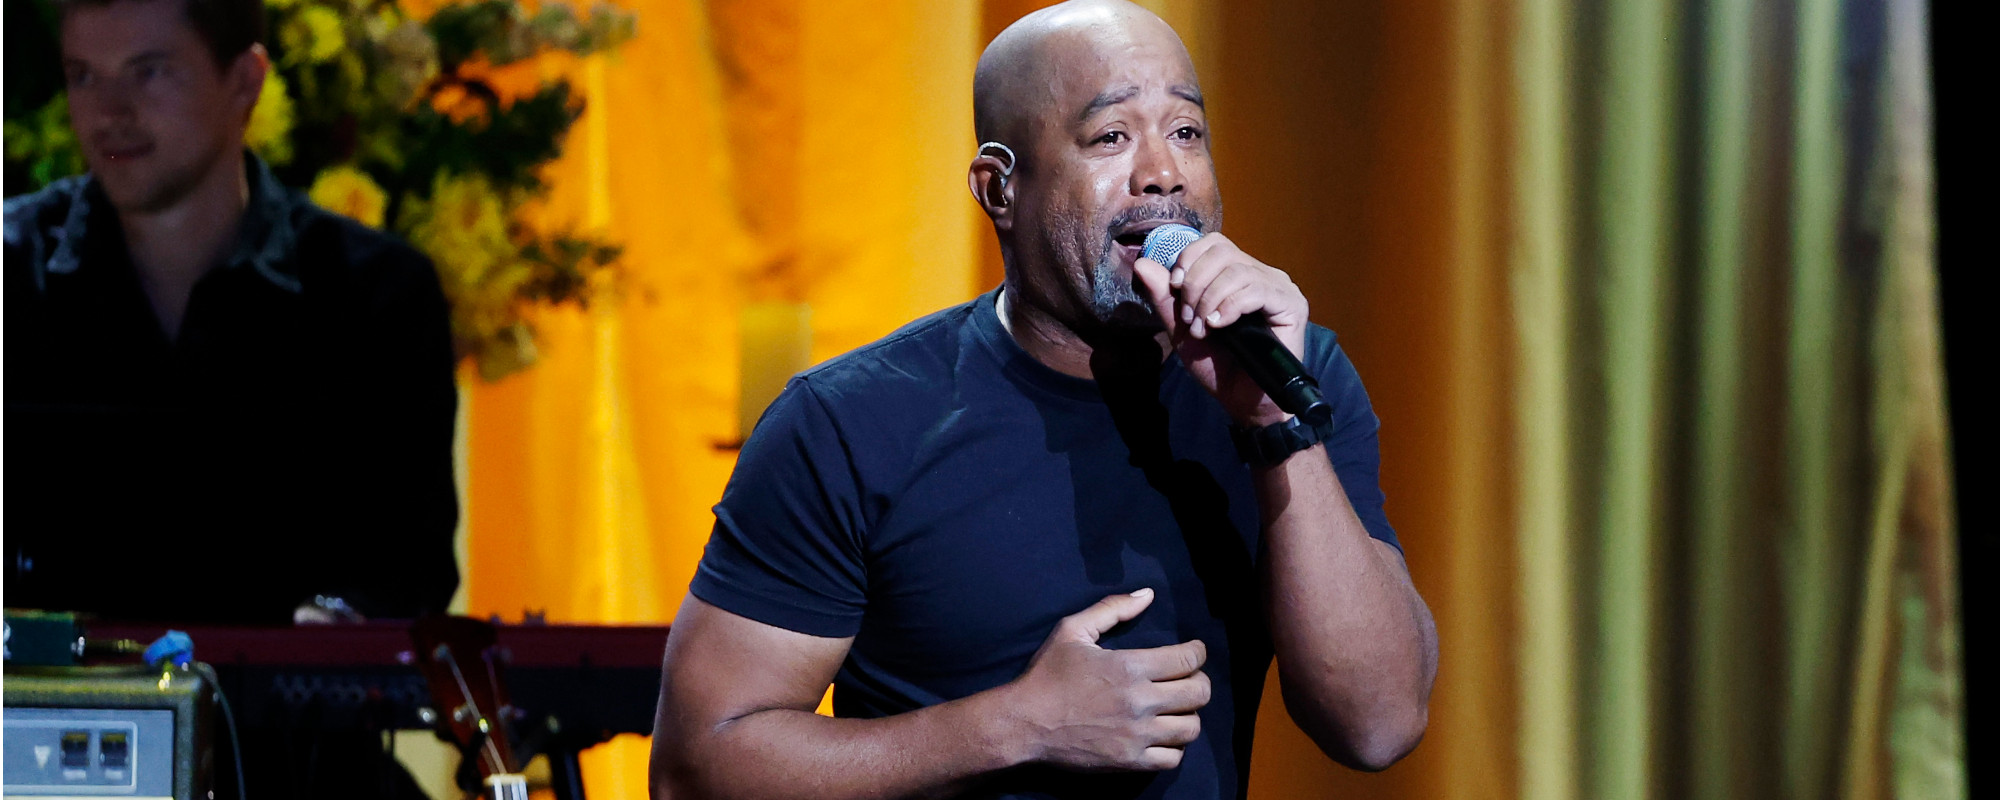 New Darius Rucker Arrest Details Emerge: Incident Stems From Traffic Stop a Year Ago